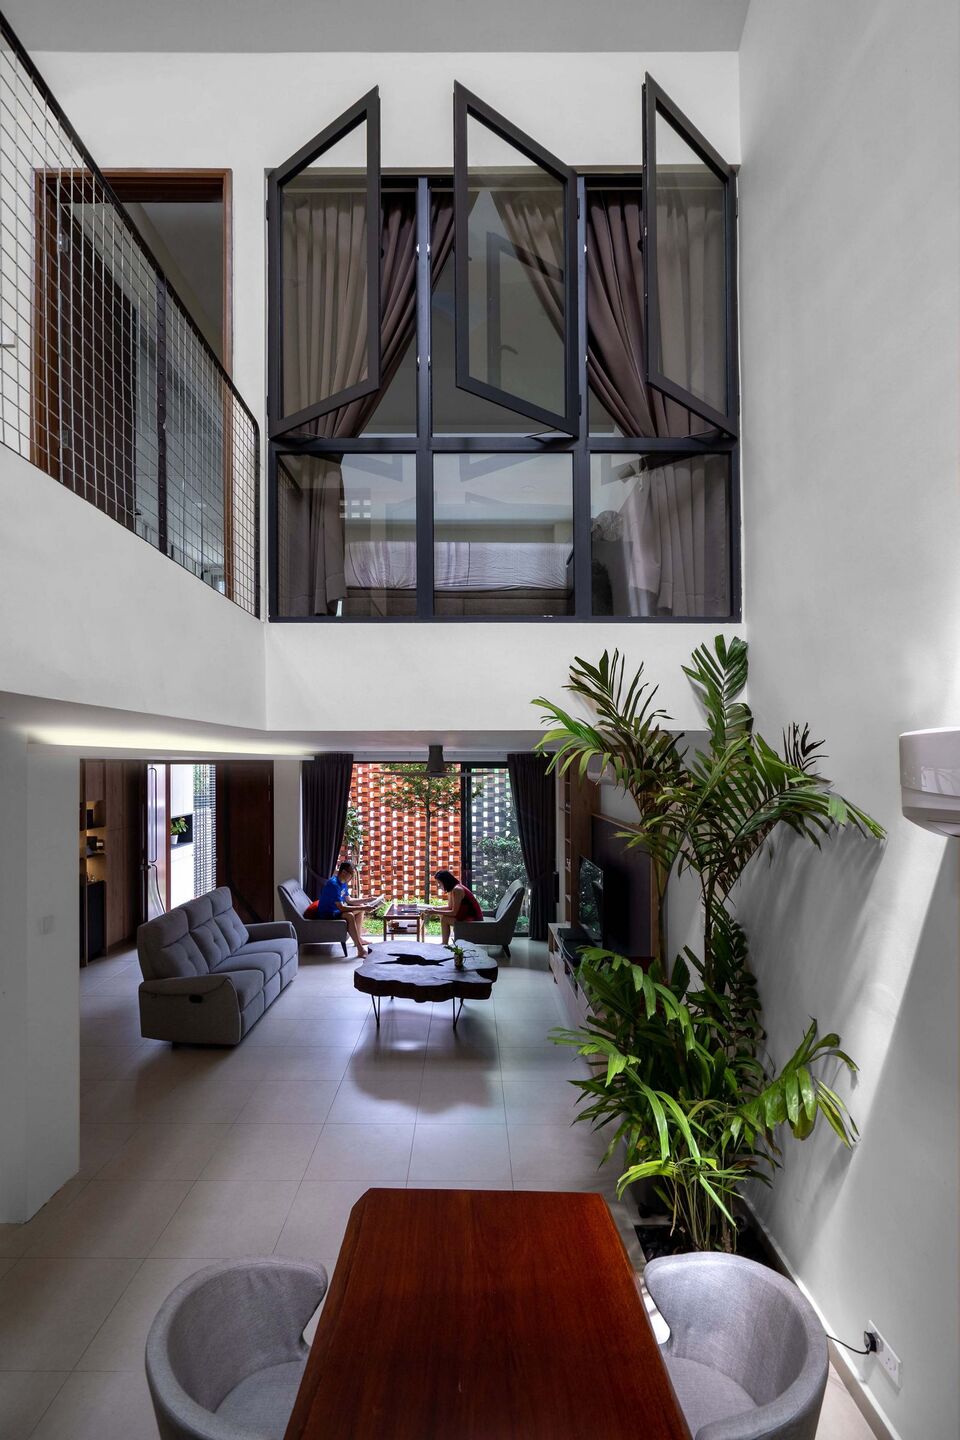 KL Terrace House Uses Brick Wall At Front Porch For Privacy But Is ...